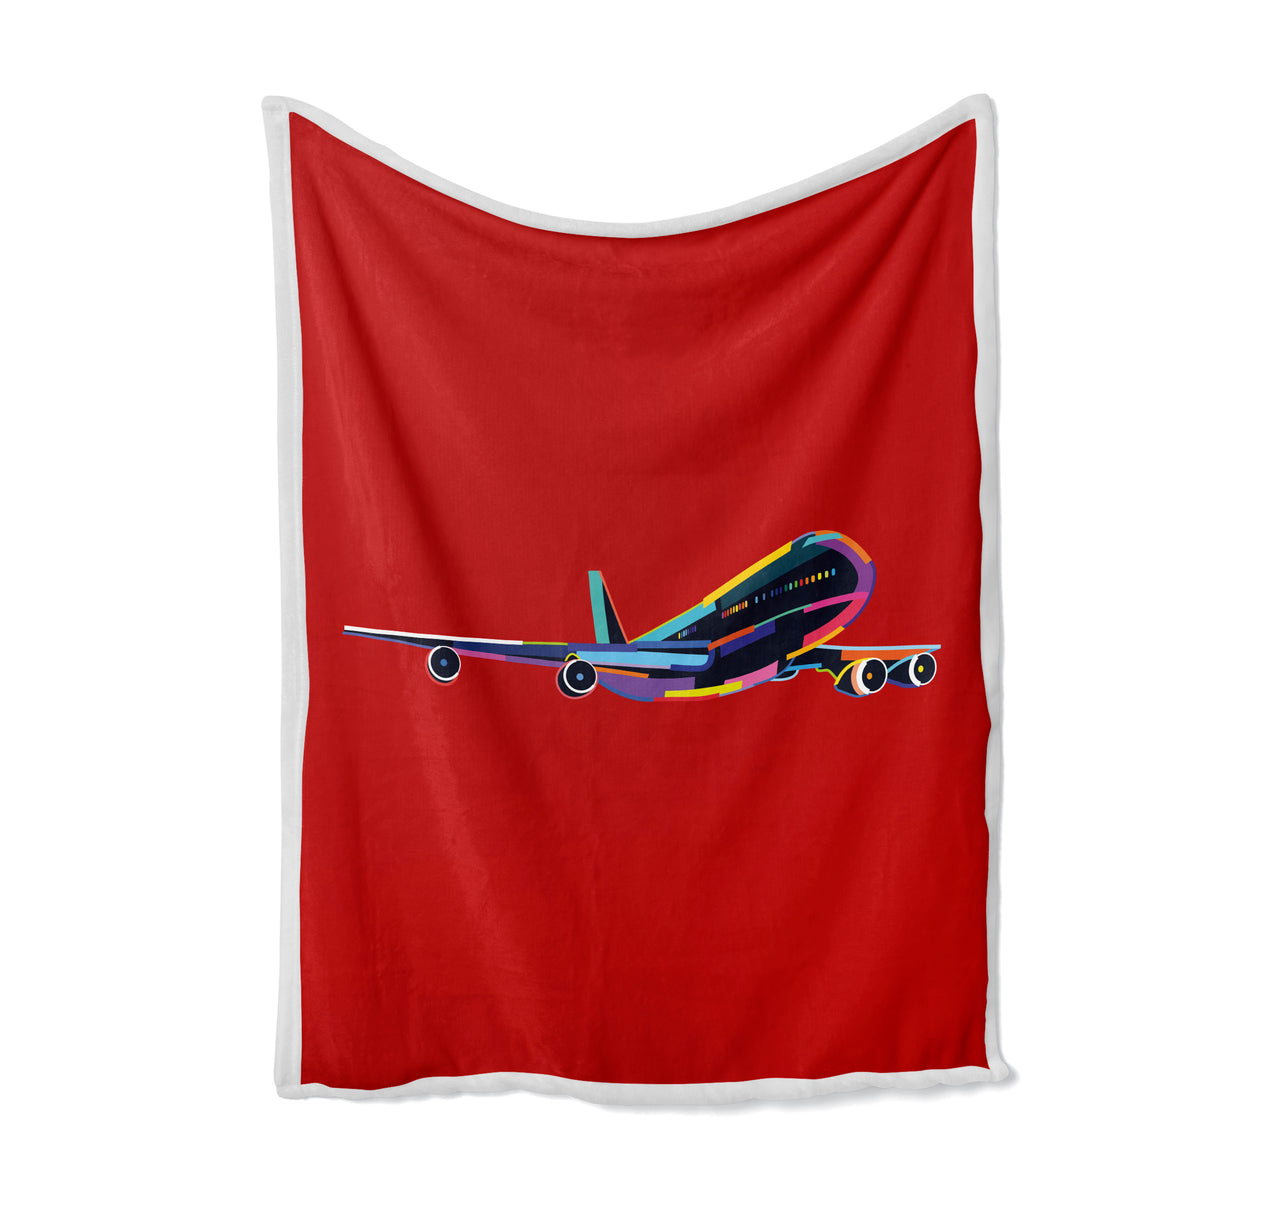 Multicolor Airplane Designed Bed Blankets & Covers